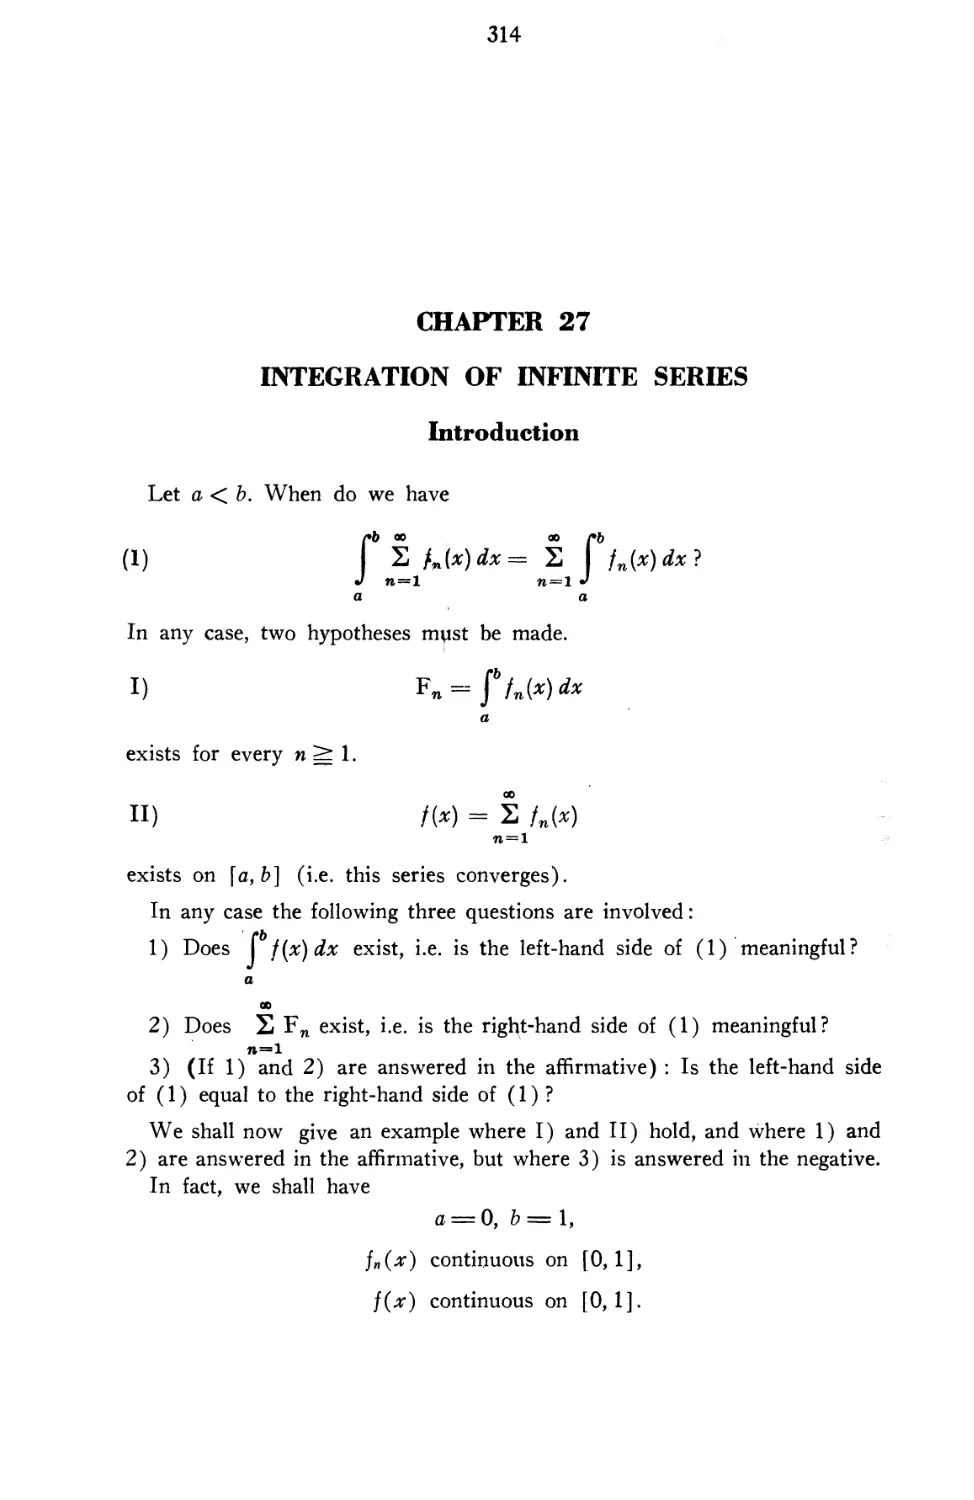 Chapter 27 The Integration of Infinite Series